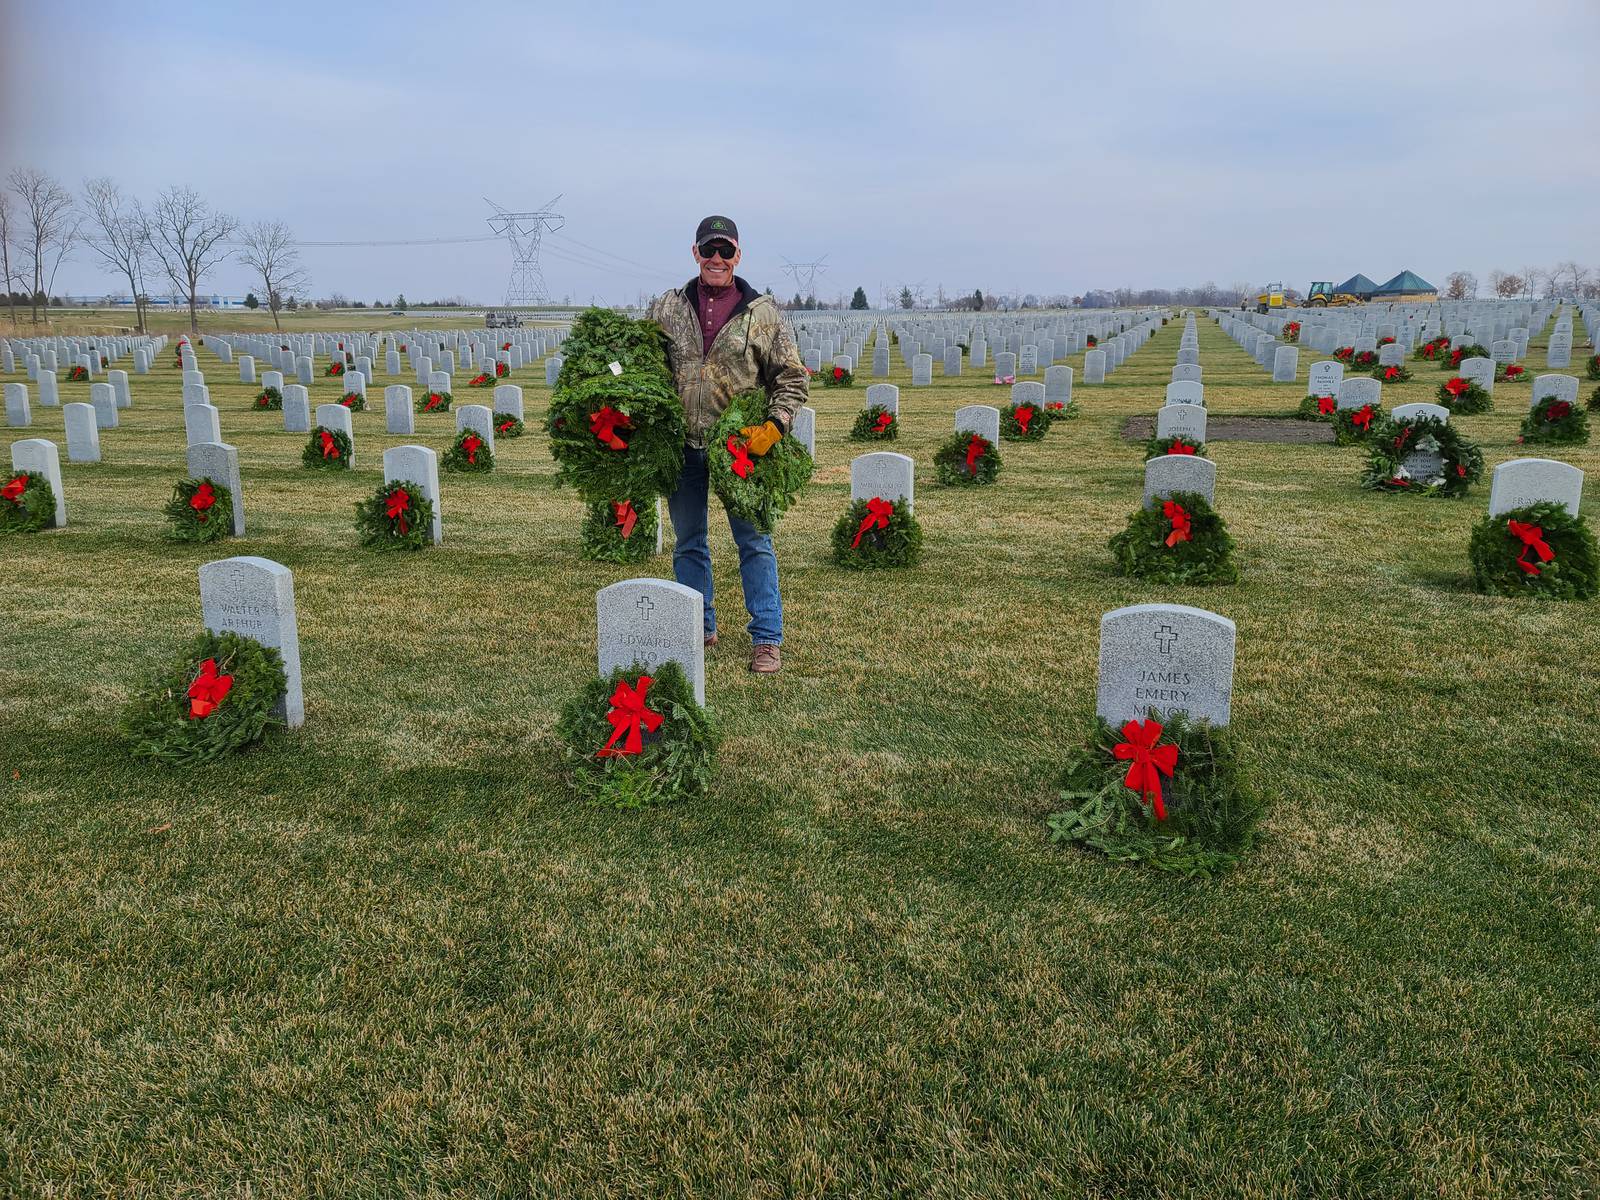 wreaths-across-america-project-marches-on-with-changes-agrinews